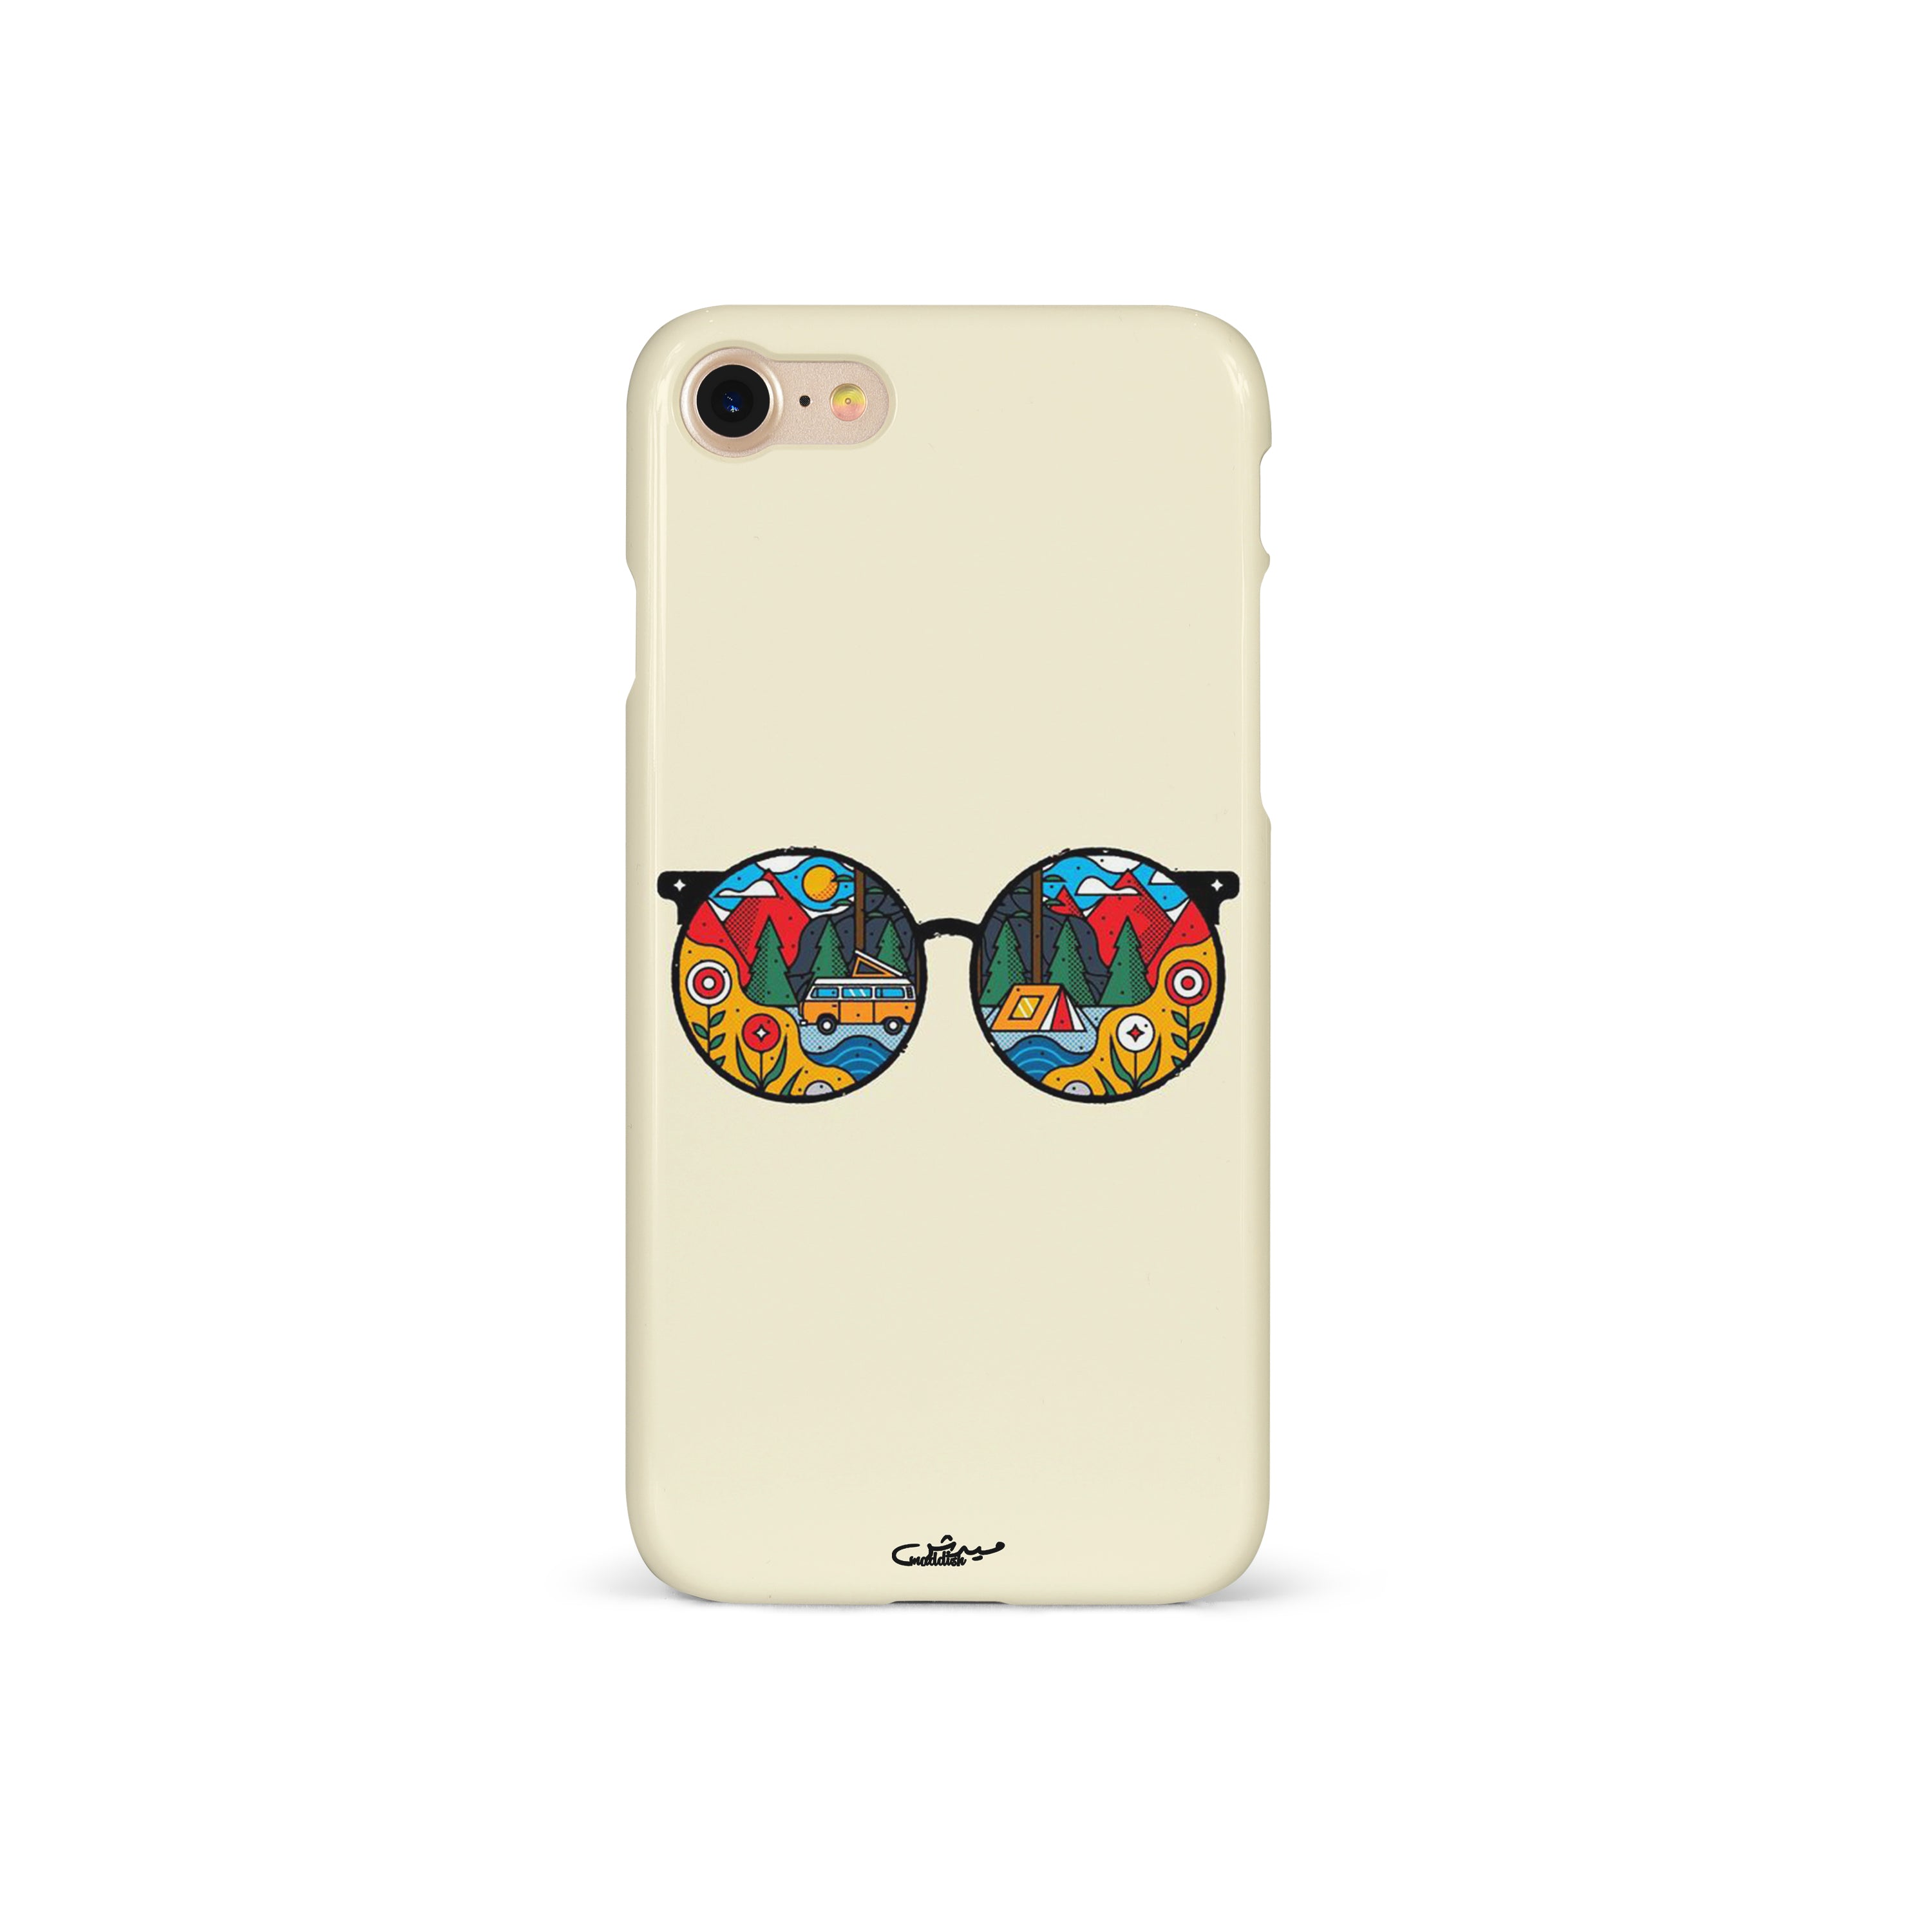 Illustrated Desi Mobile Covers